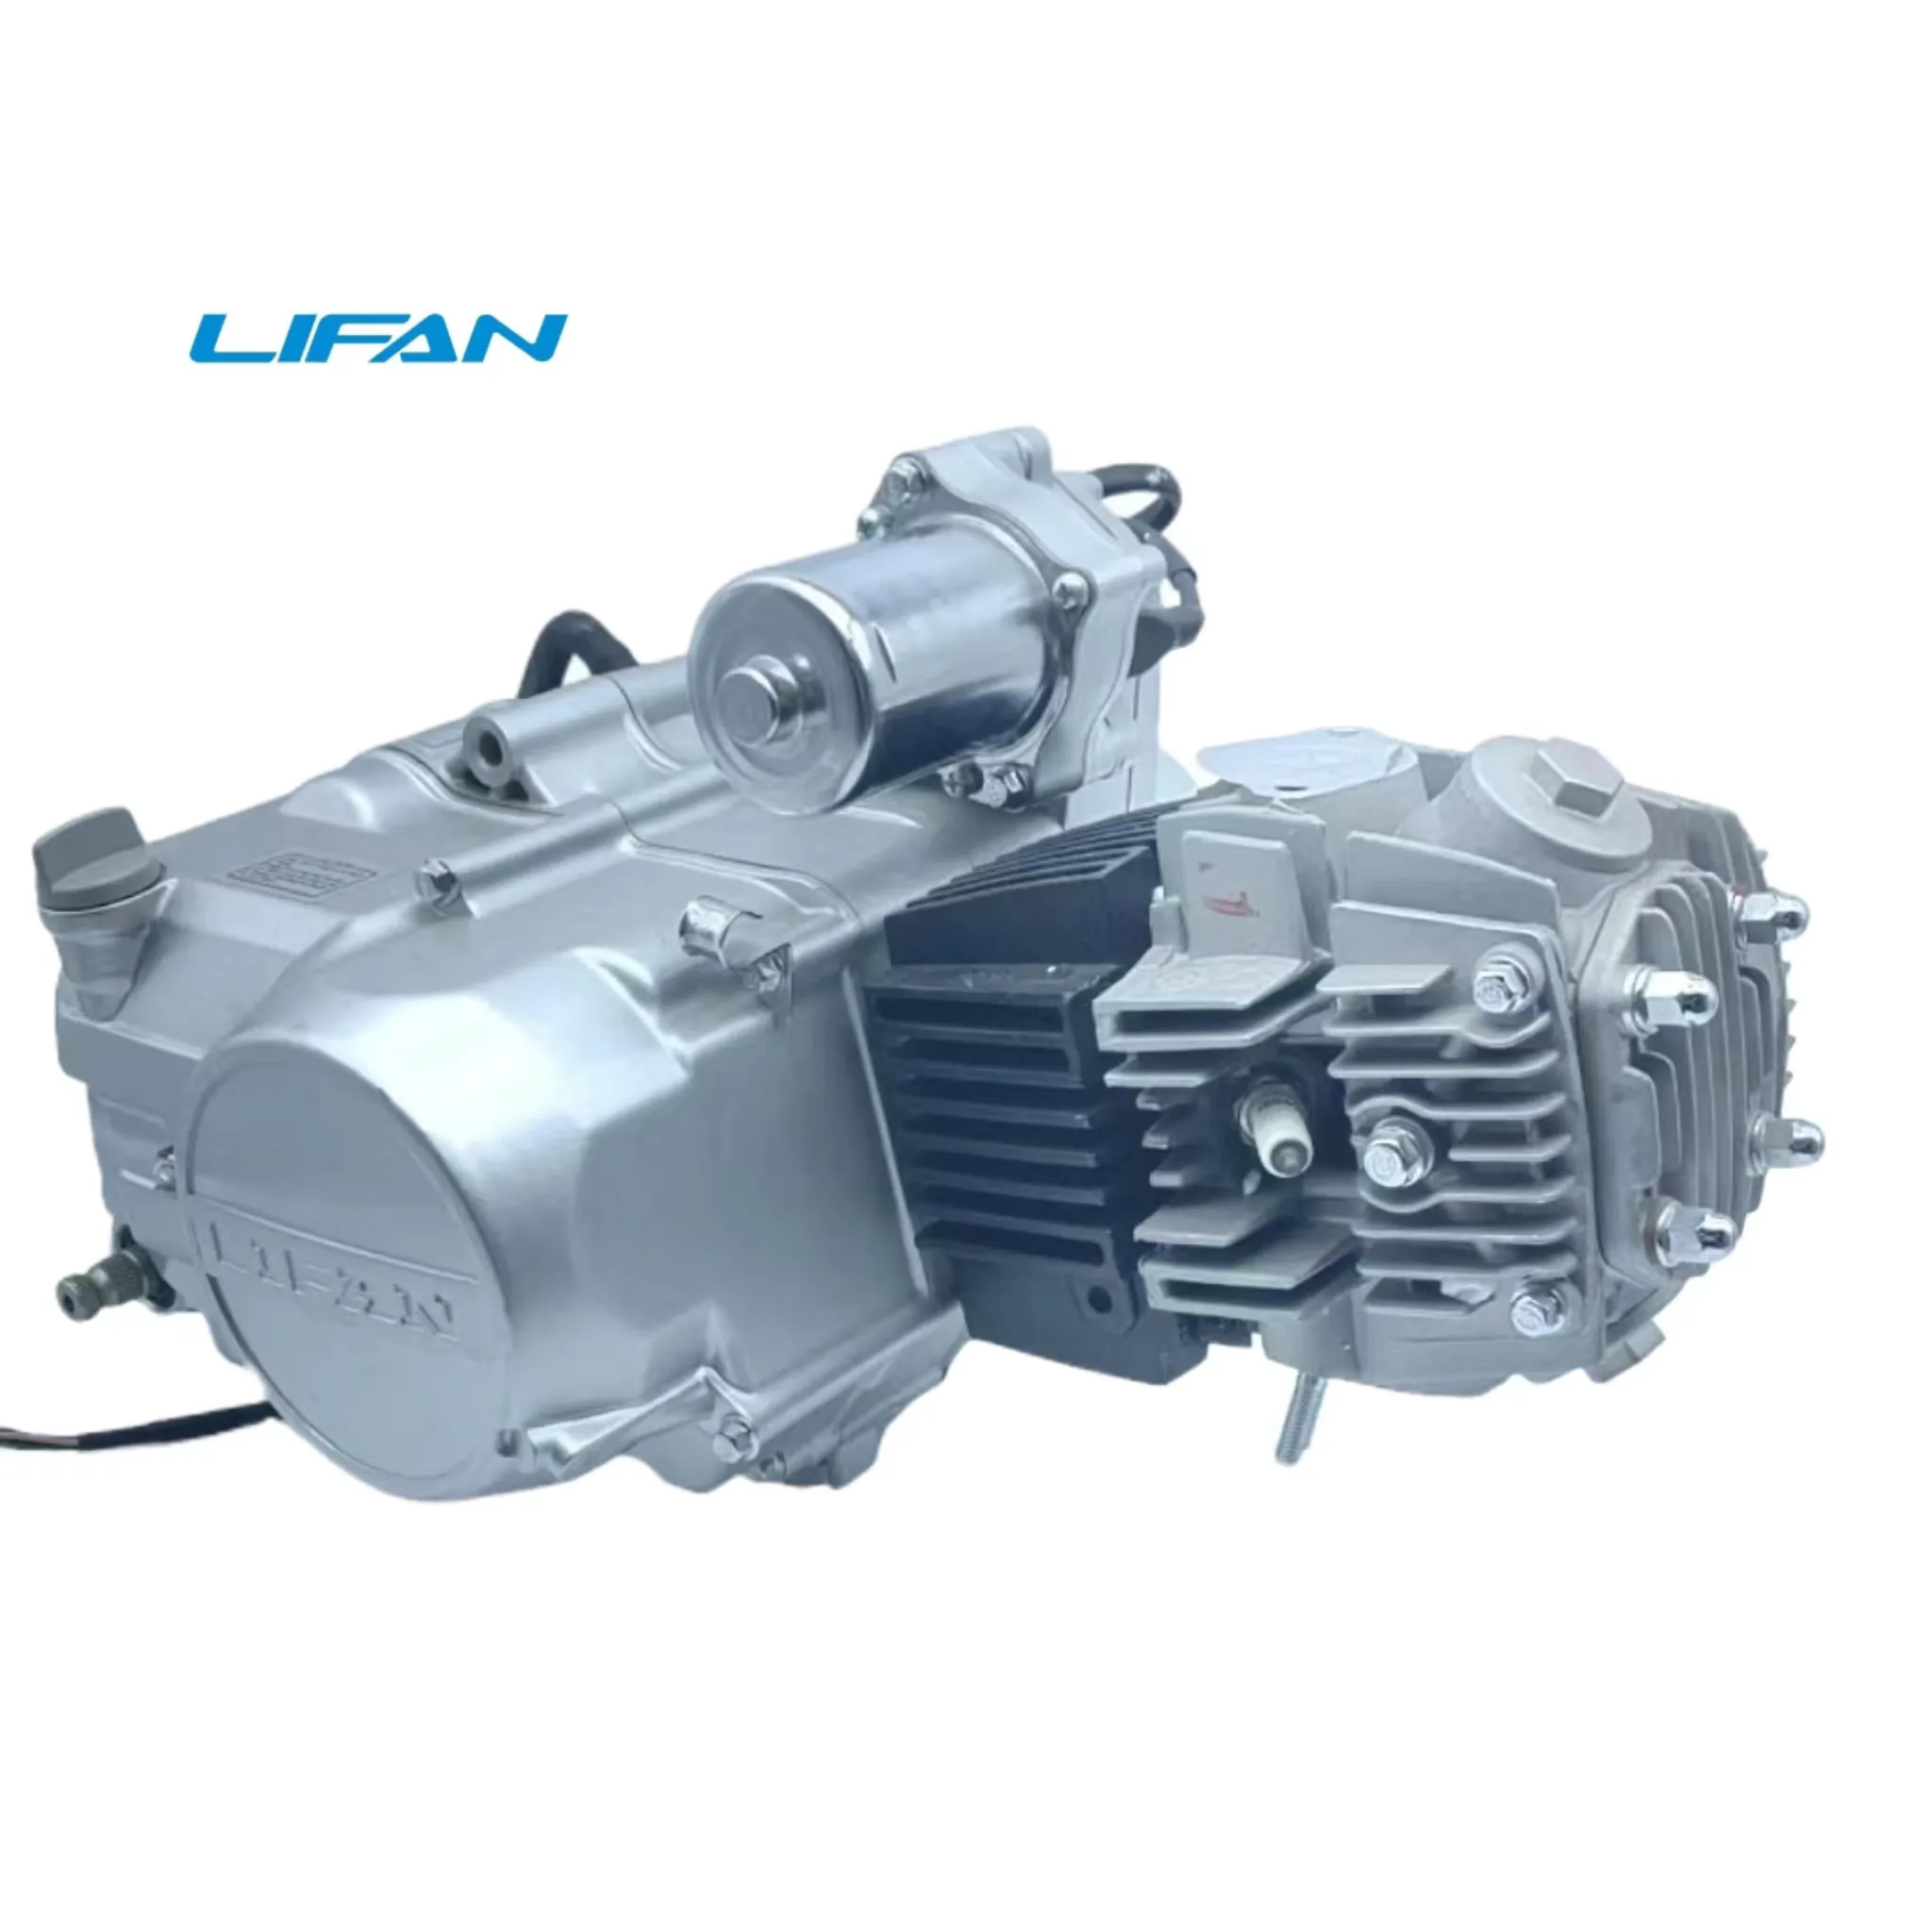 Lifan Motorcycle Engine 110cc 125cc Horizontal Gasoline Engine for ATV Bike Tricycle Motorbike Air-cooled Motor CycleParts